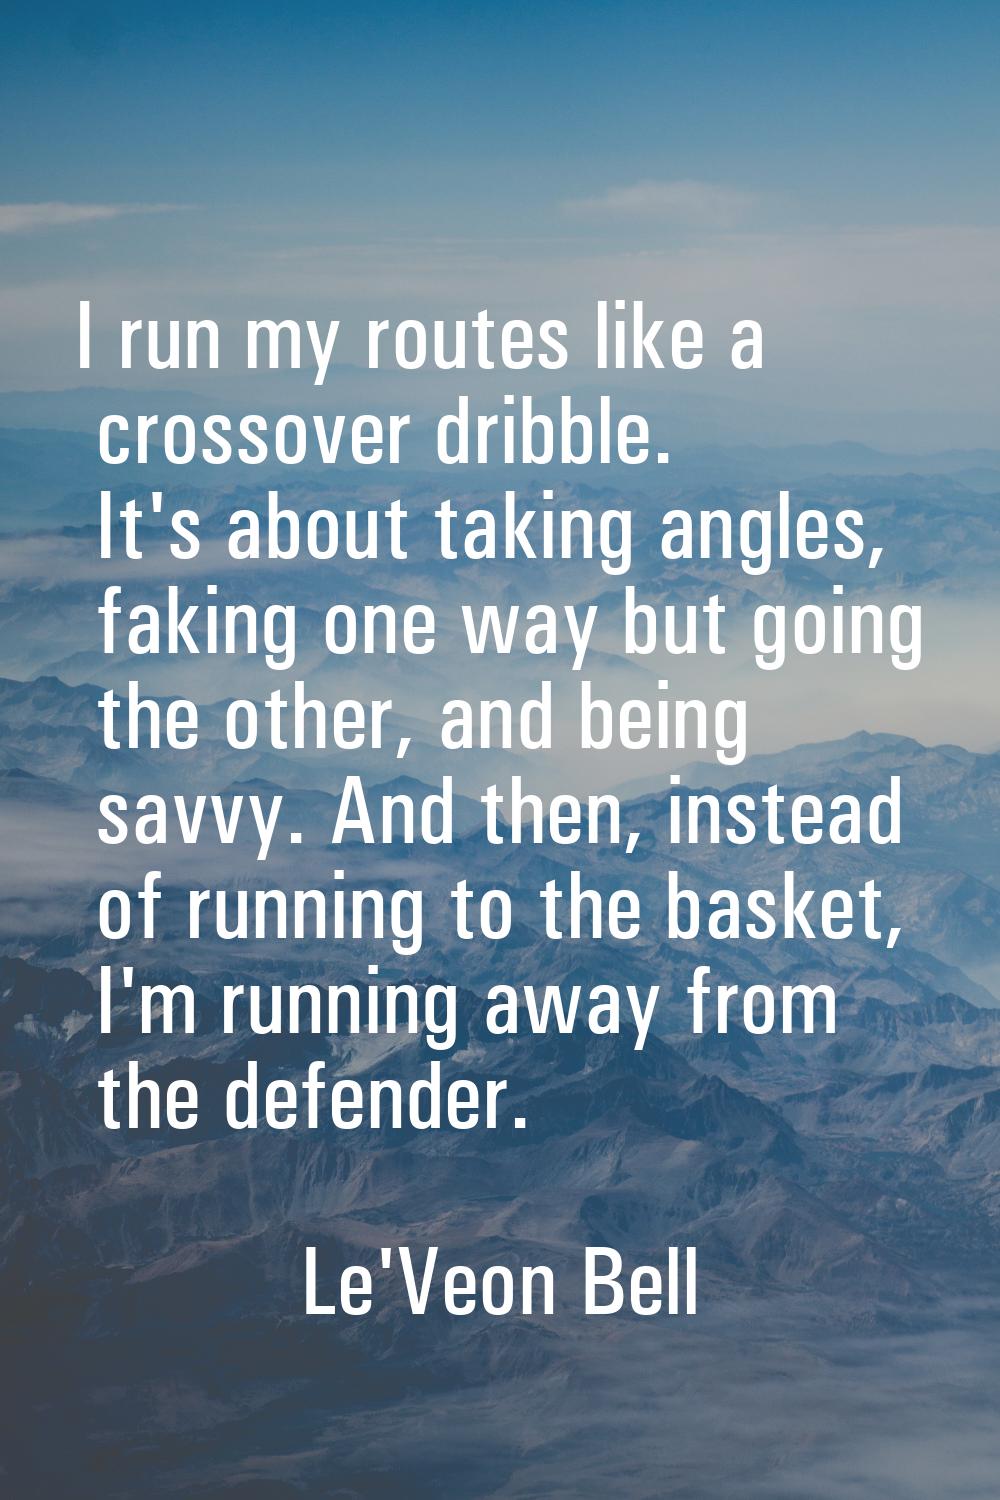 I run my routes like a crossover dribble. It's about taking angles, faking one way but going the ot